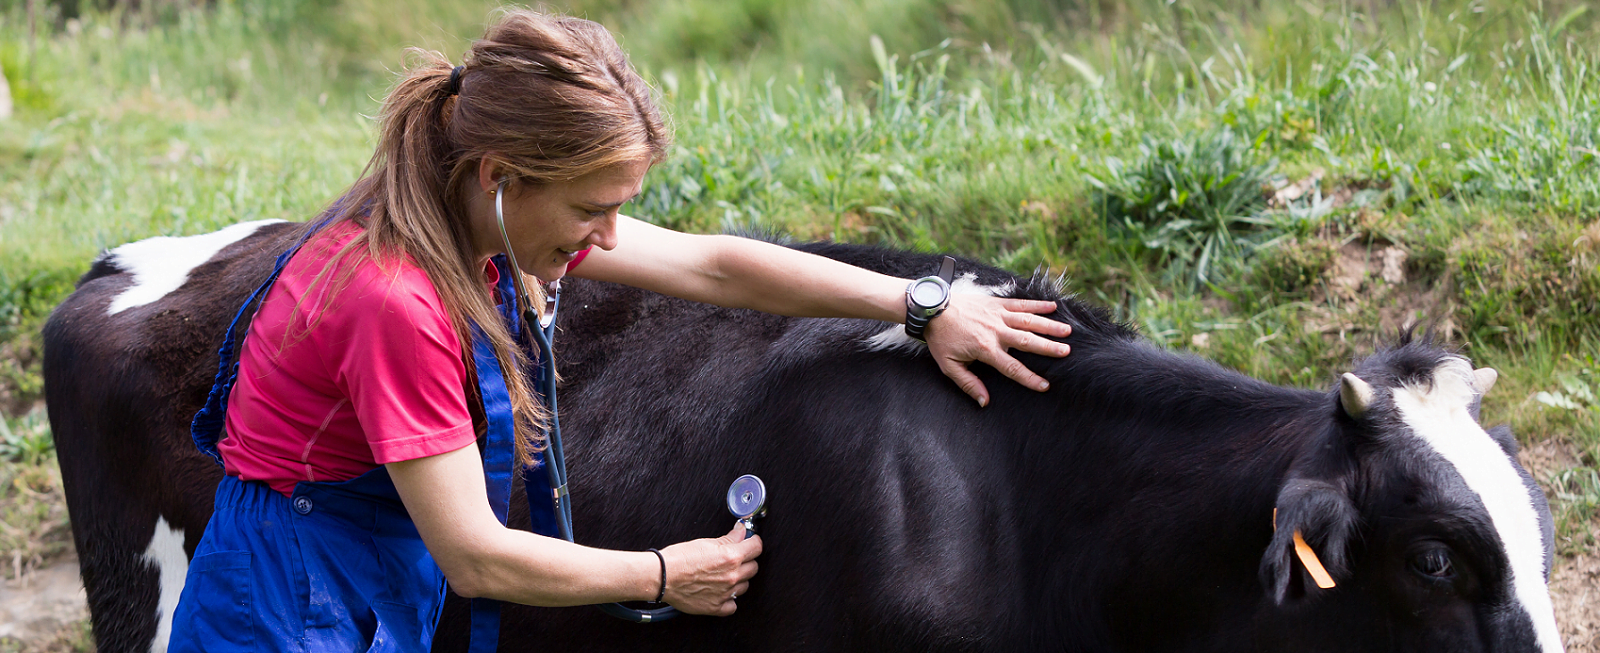 Photo of lone working female veterinary surgeon inspecting a cow in a field.